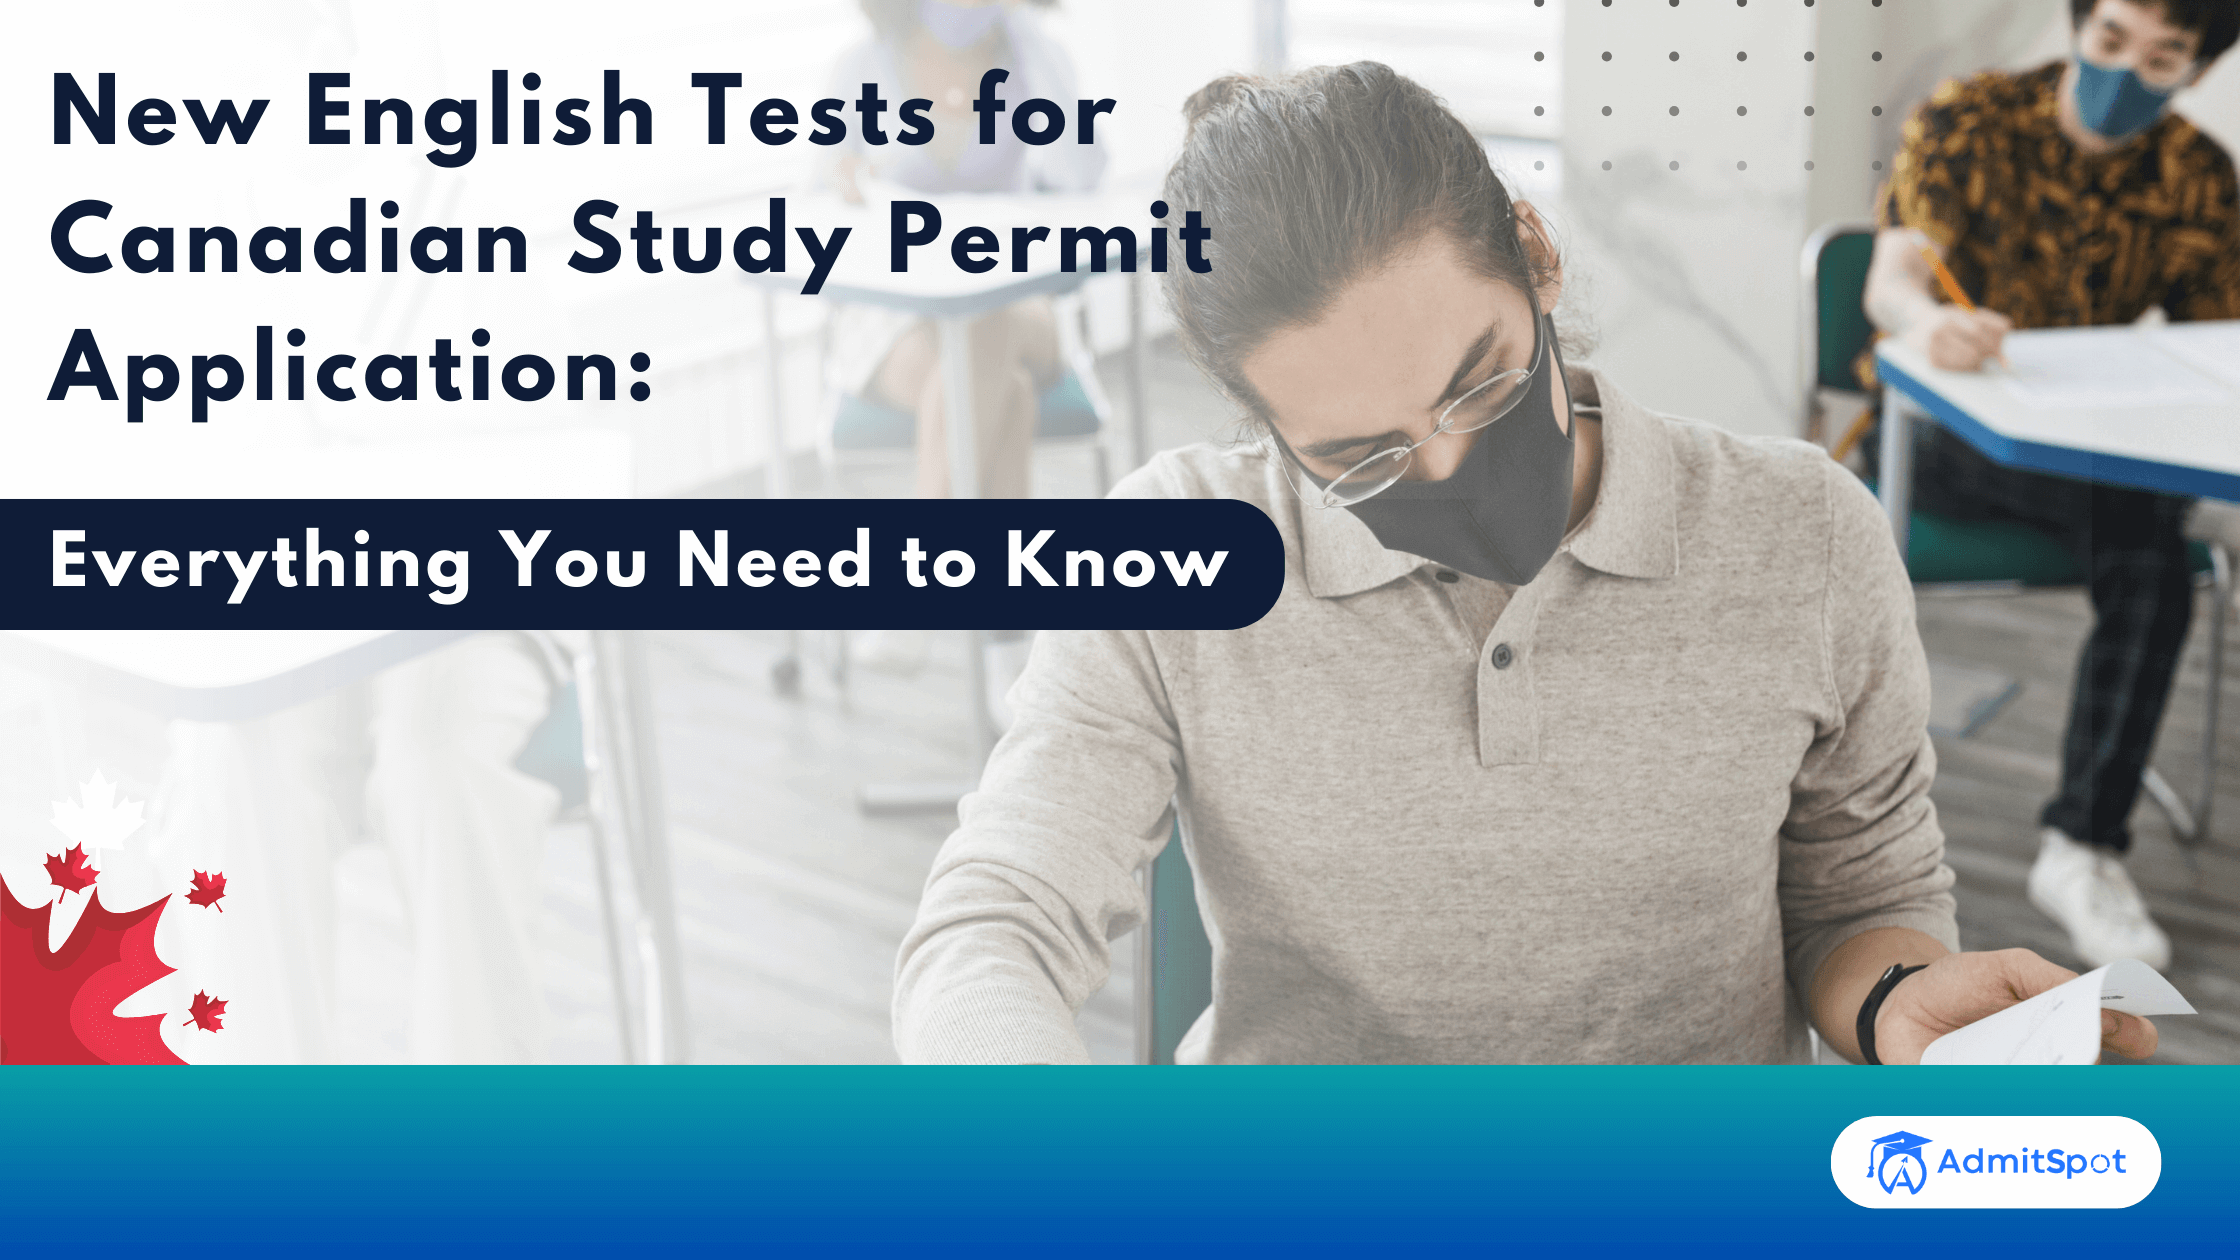 New English Tests for Canadian Study Permit Application: Everything You Need to Know